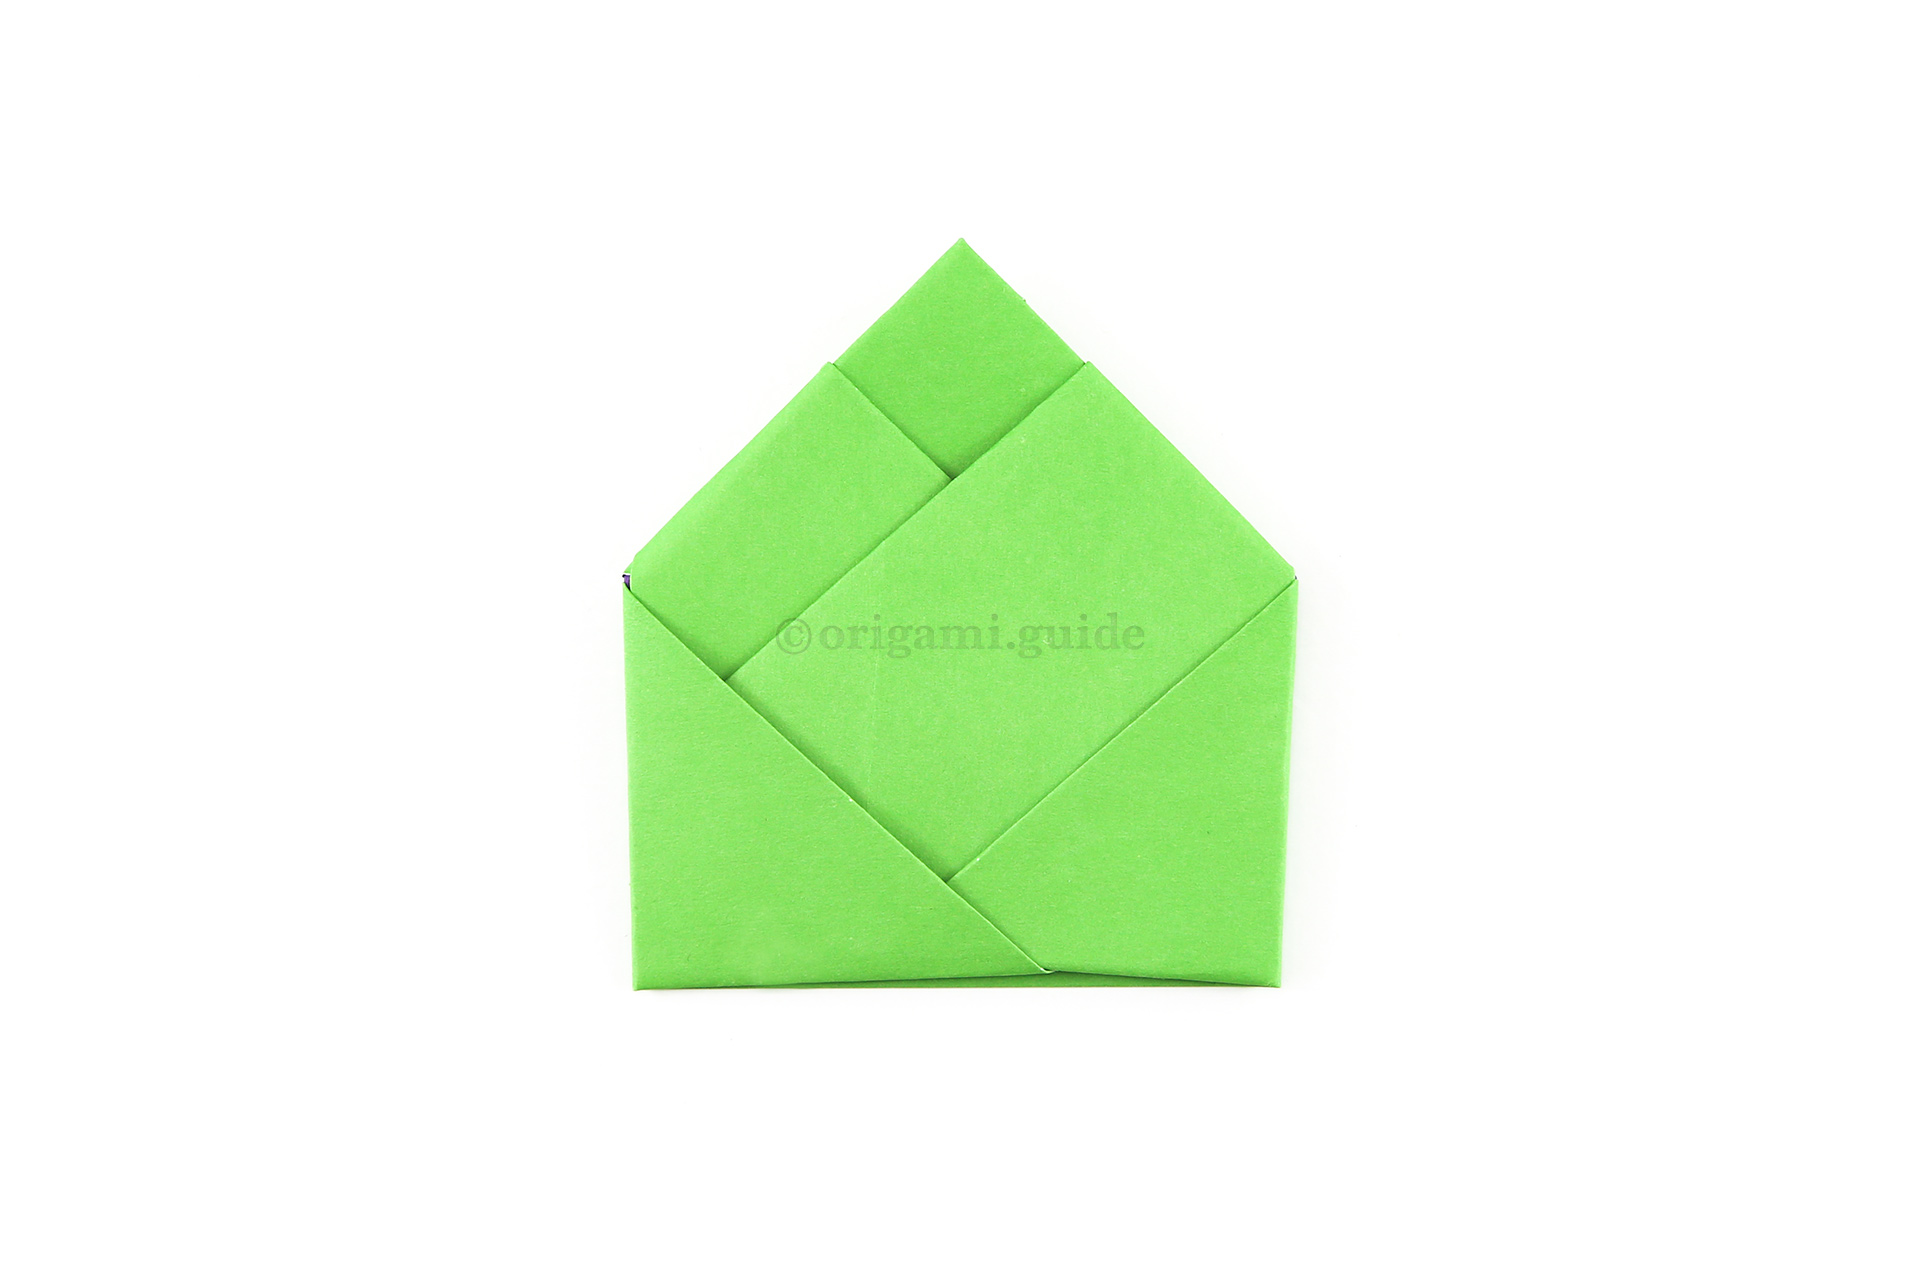 Flip the paper over, your origami bamboo letterfold is now complete.